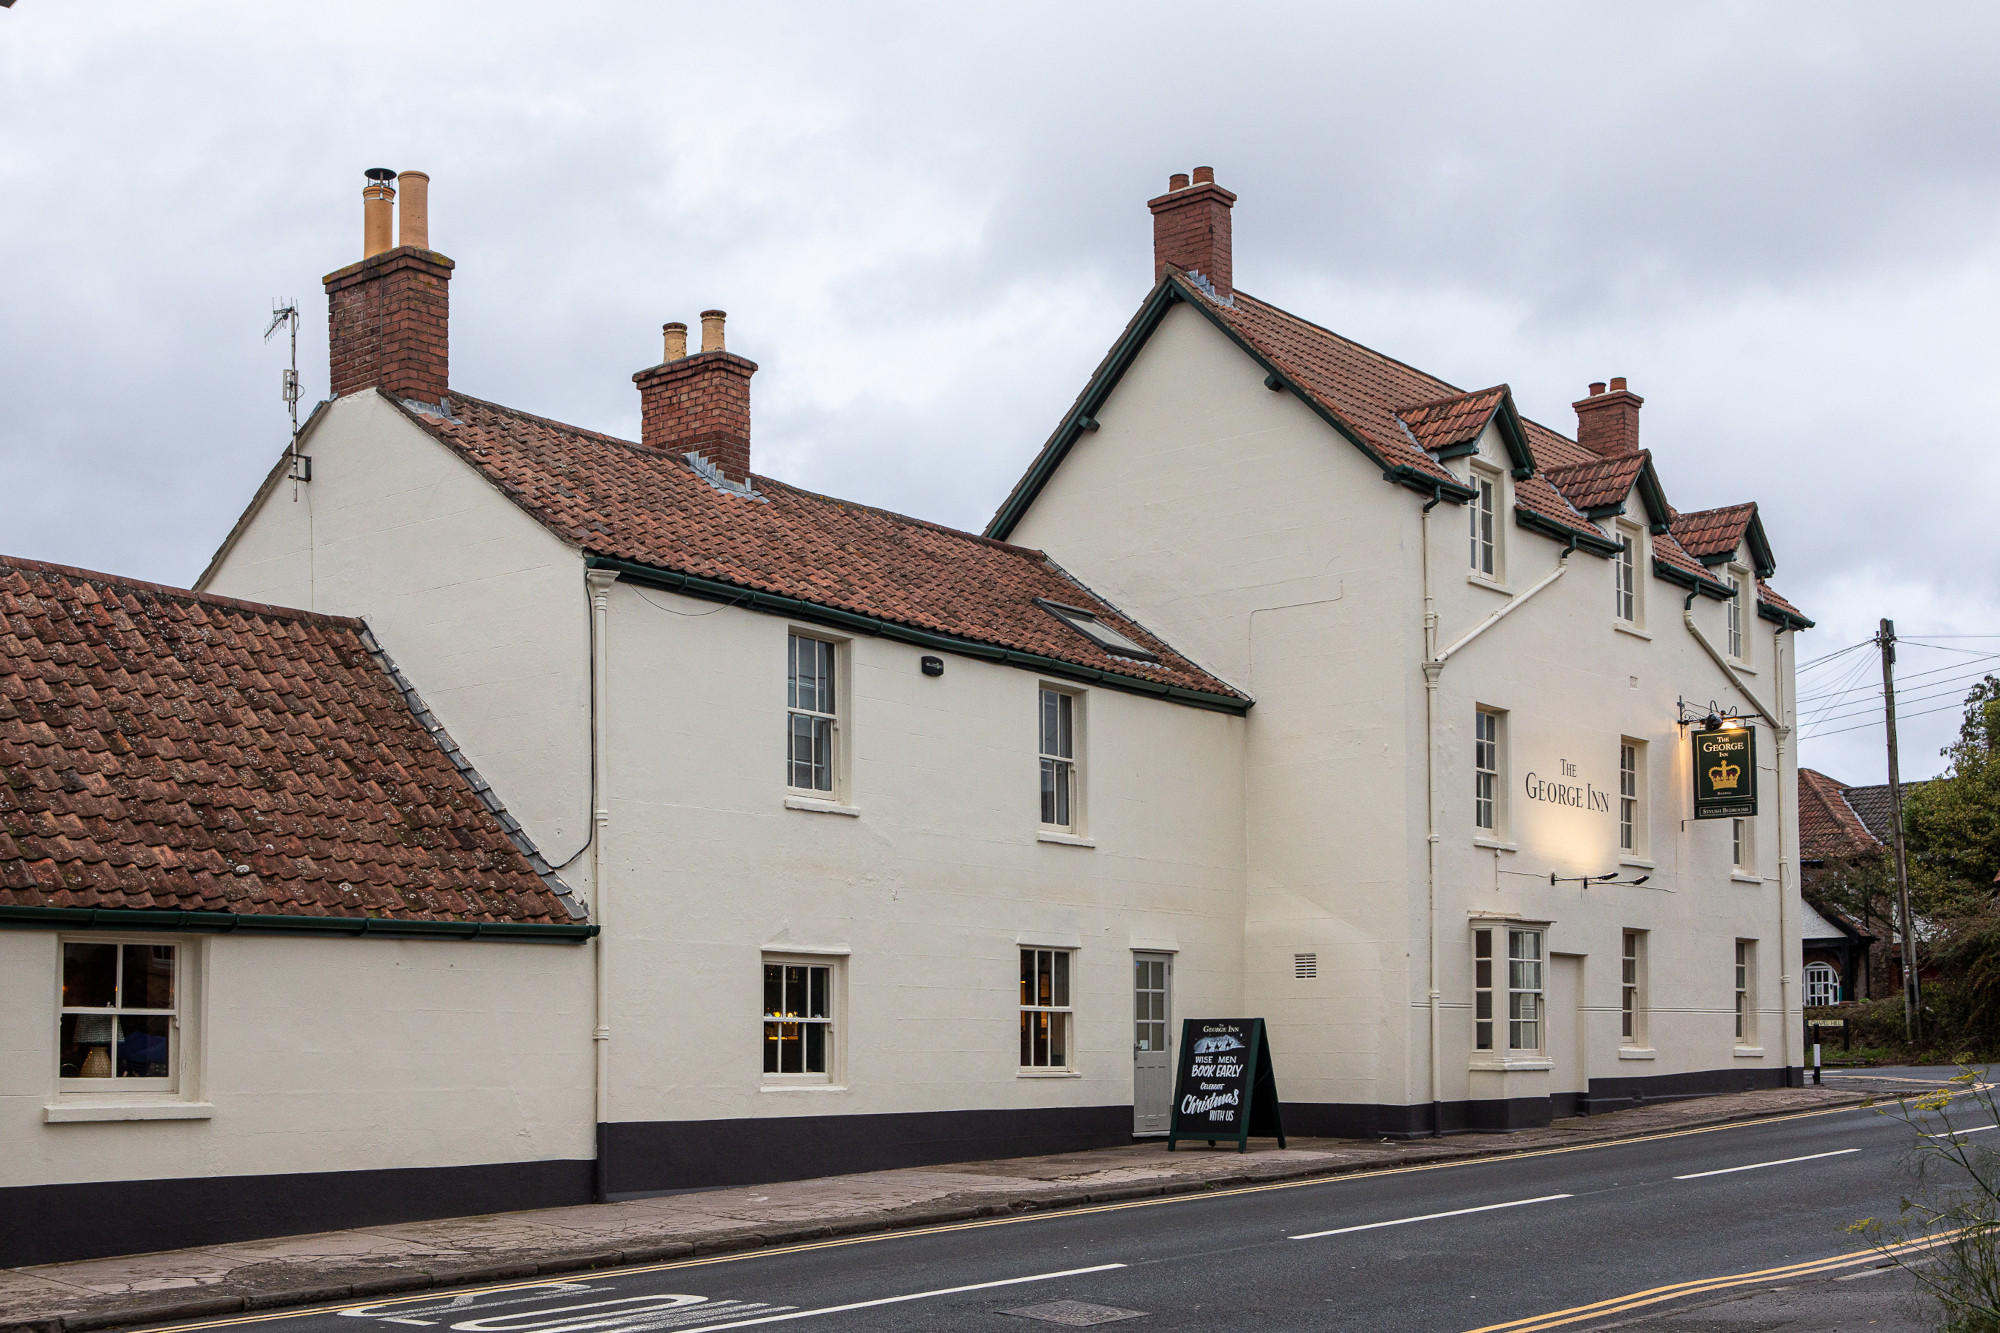 Images The George at Backwell